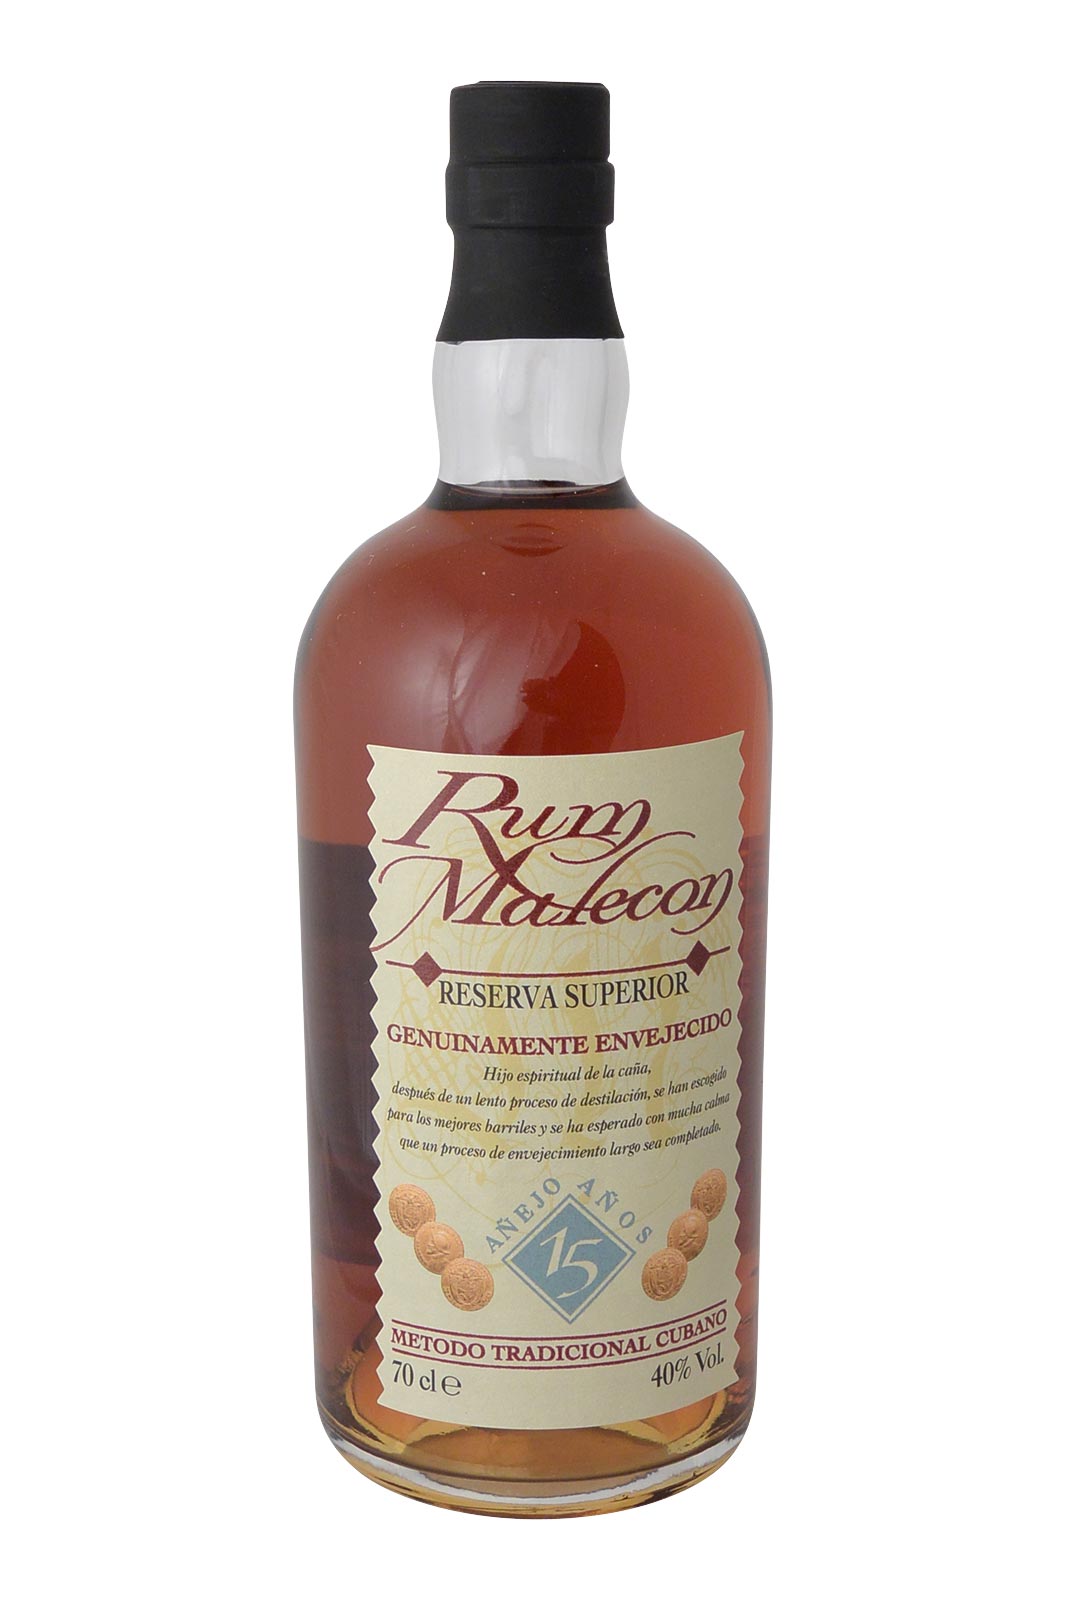 Rum Malecon Reserva Imperial 15 Year Old